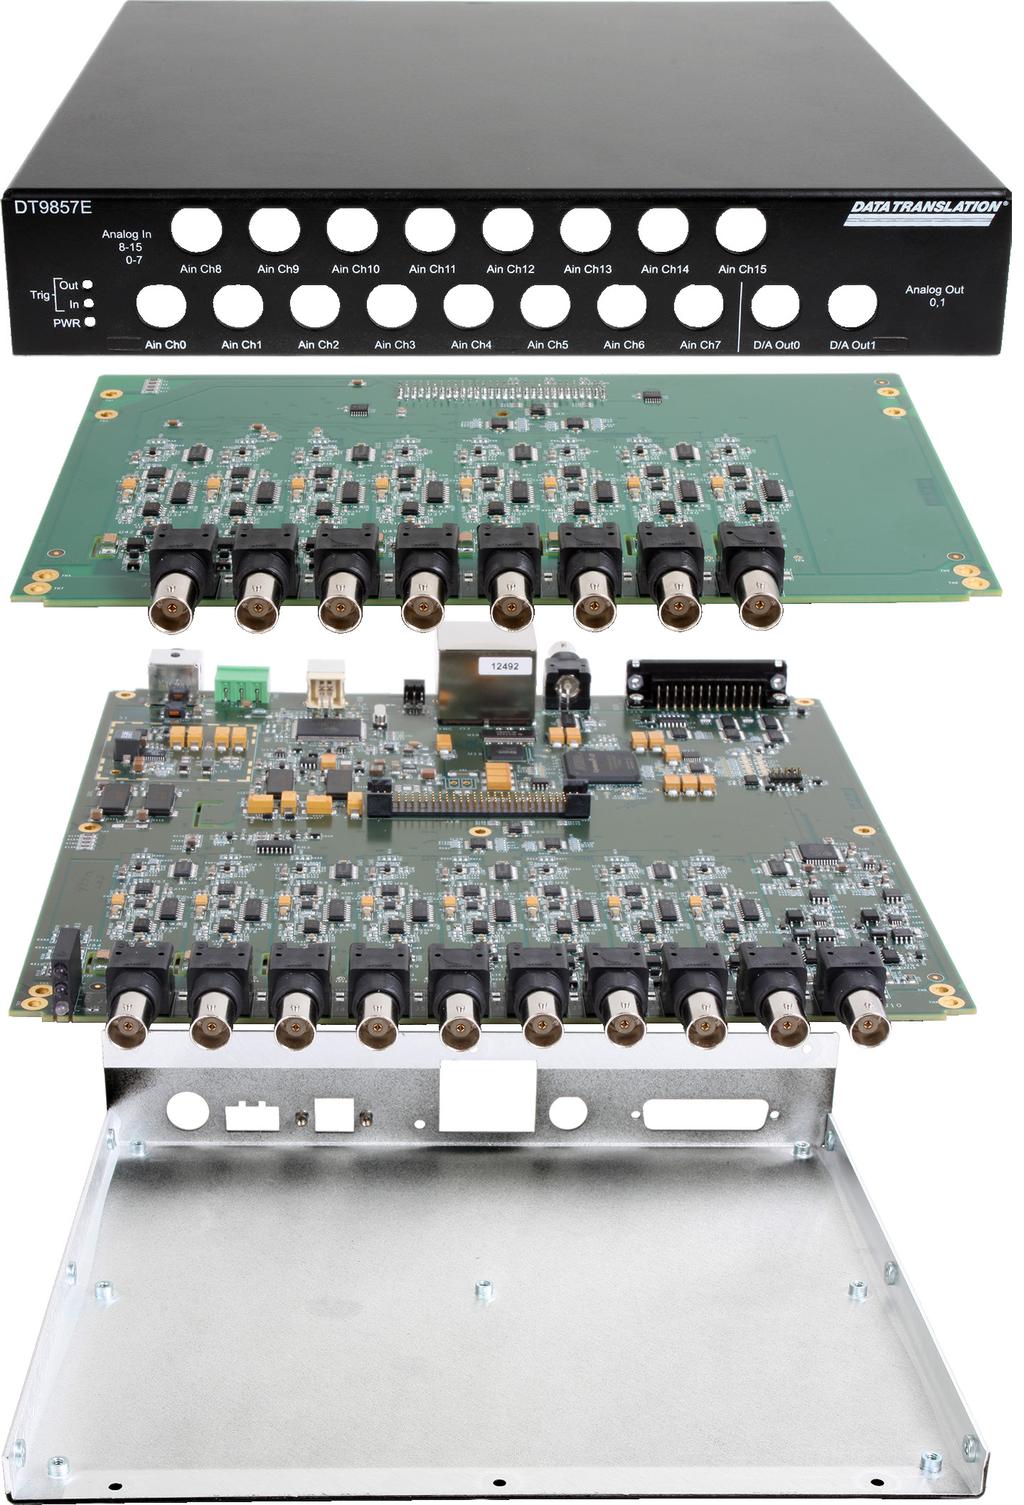 Top Board 24-bit Delta-Sigma A/D per channel full simultaneous operation 16 IEPE Inputs 8 on top board 8 on bottom board Bottom Board Each IEPE input: up to 4ma @24V compliance accommodates most